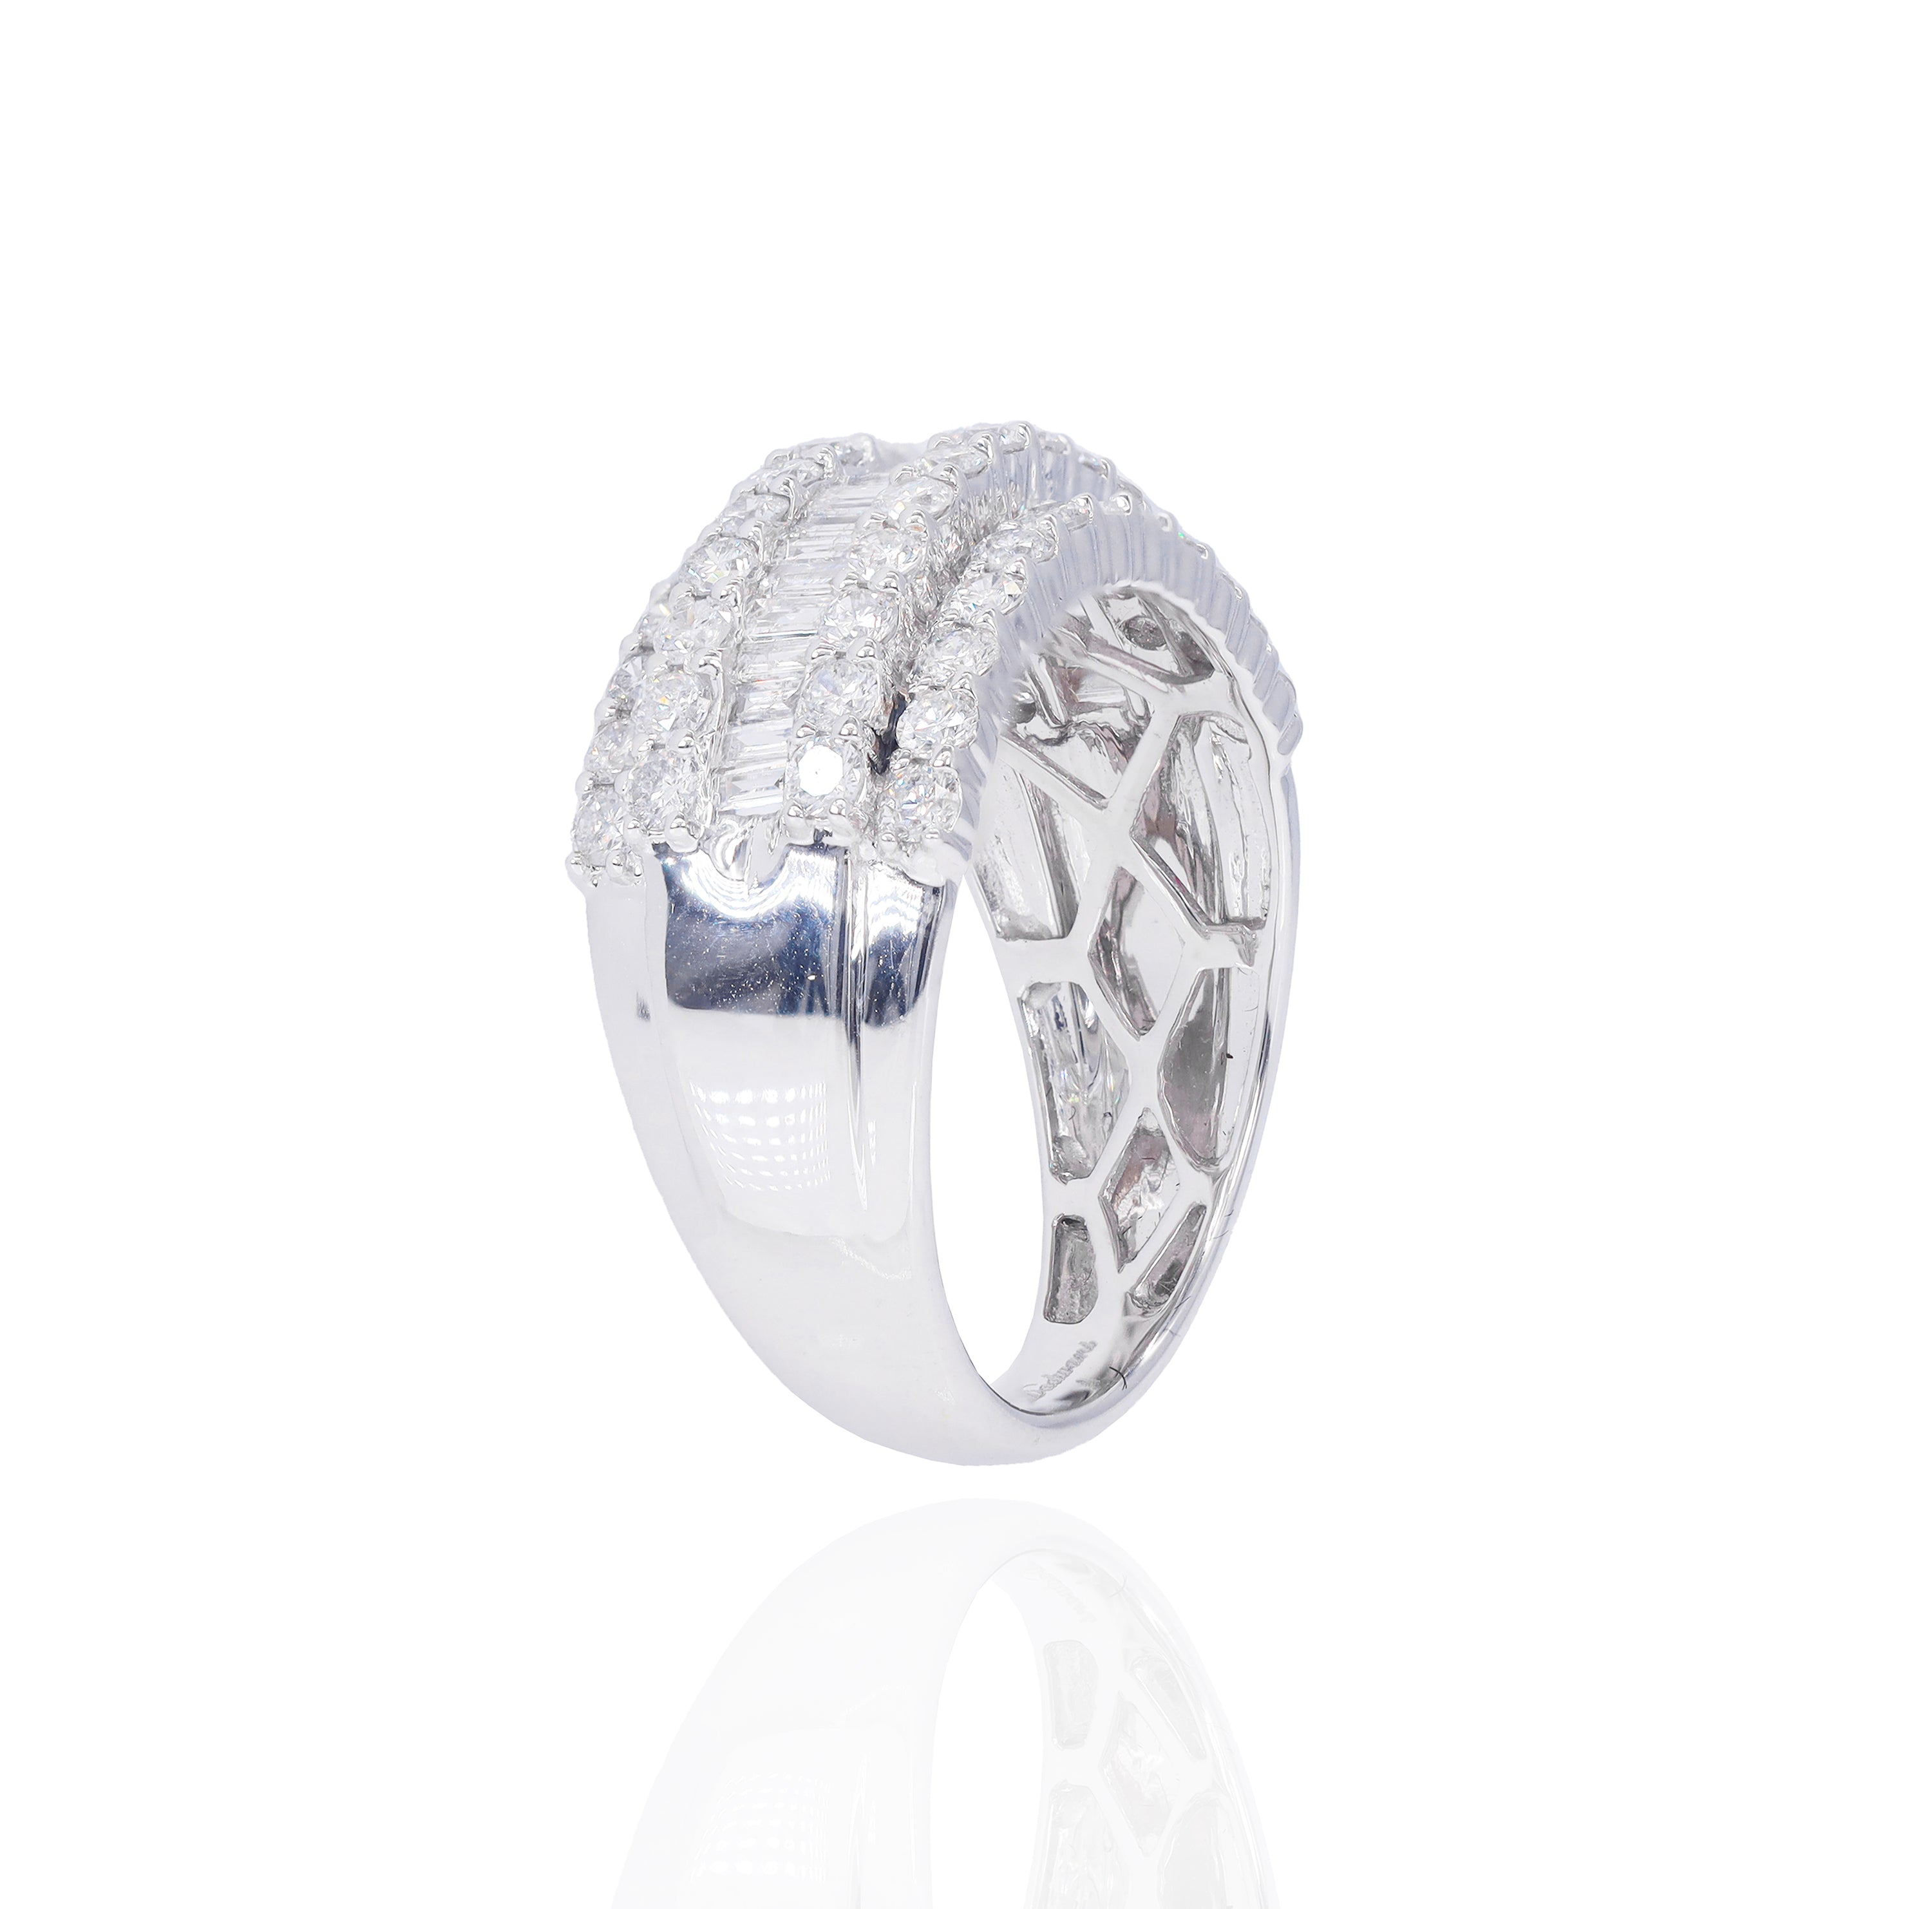 Center Baguette with 2 Row Round Diamond Ring Band